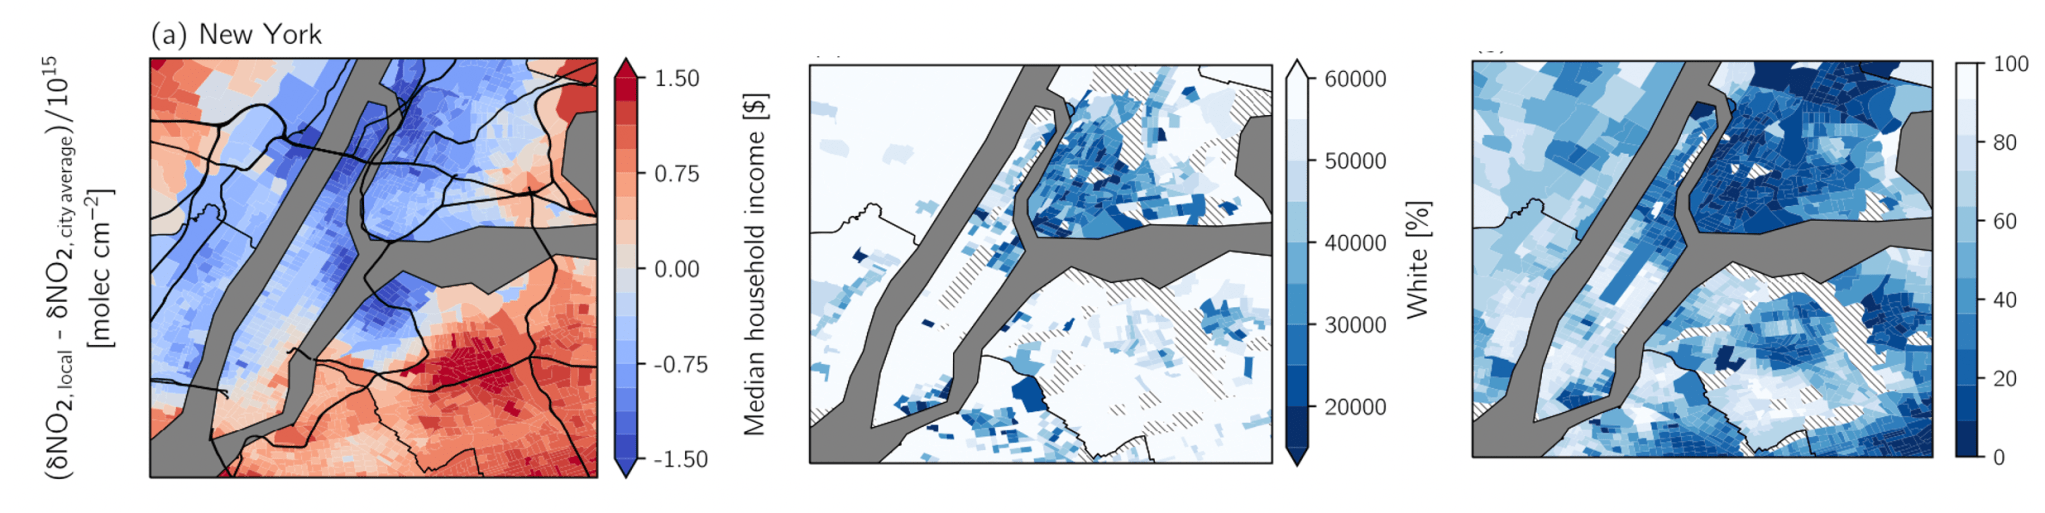 Maps of New York City showing the places with higher and lower drops in NO2, median household income and percent white.